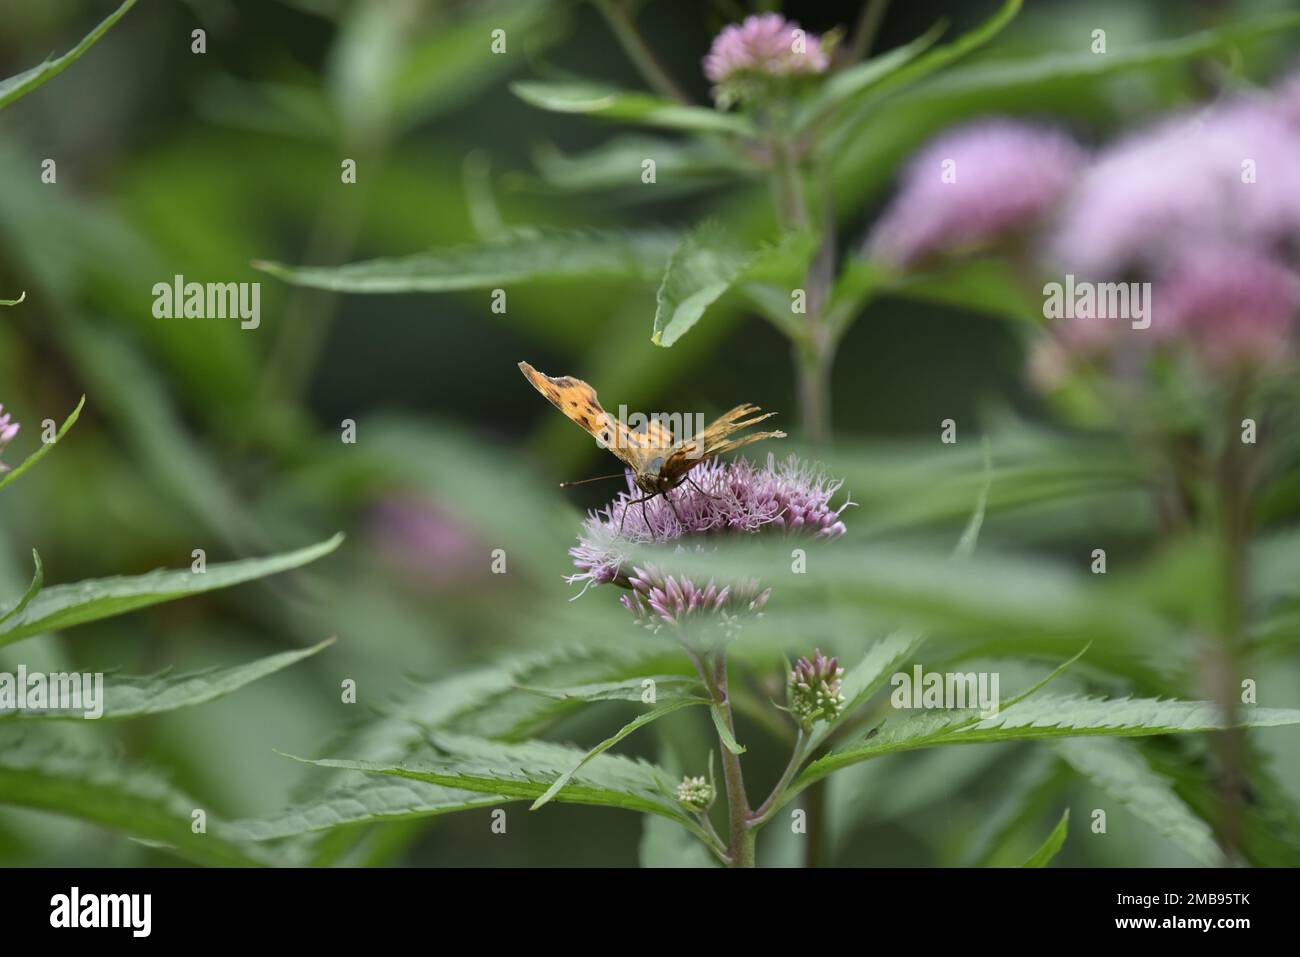 Comma Butterfly (Nymphalis c-album) Centre Foreground of Image, Facing Camera, Surrounded by Green Foliage and Pink Wildflowers on a Sunny Day in UK Stock Photo